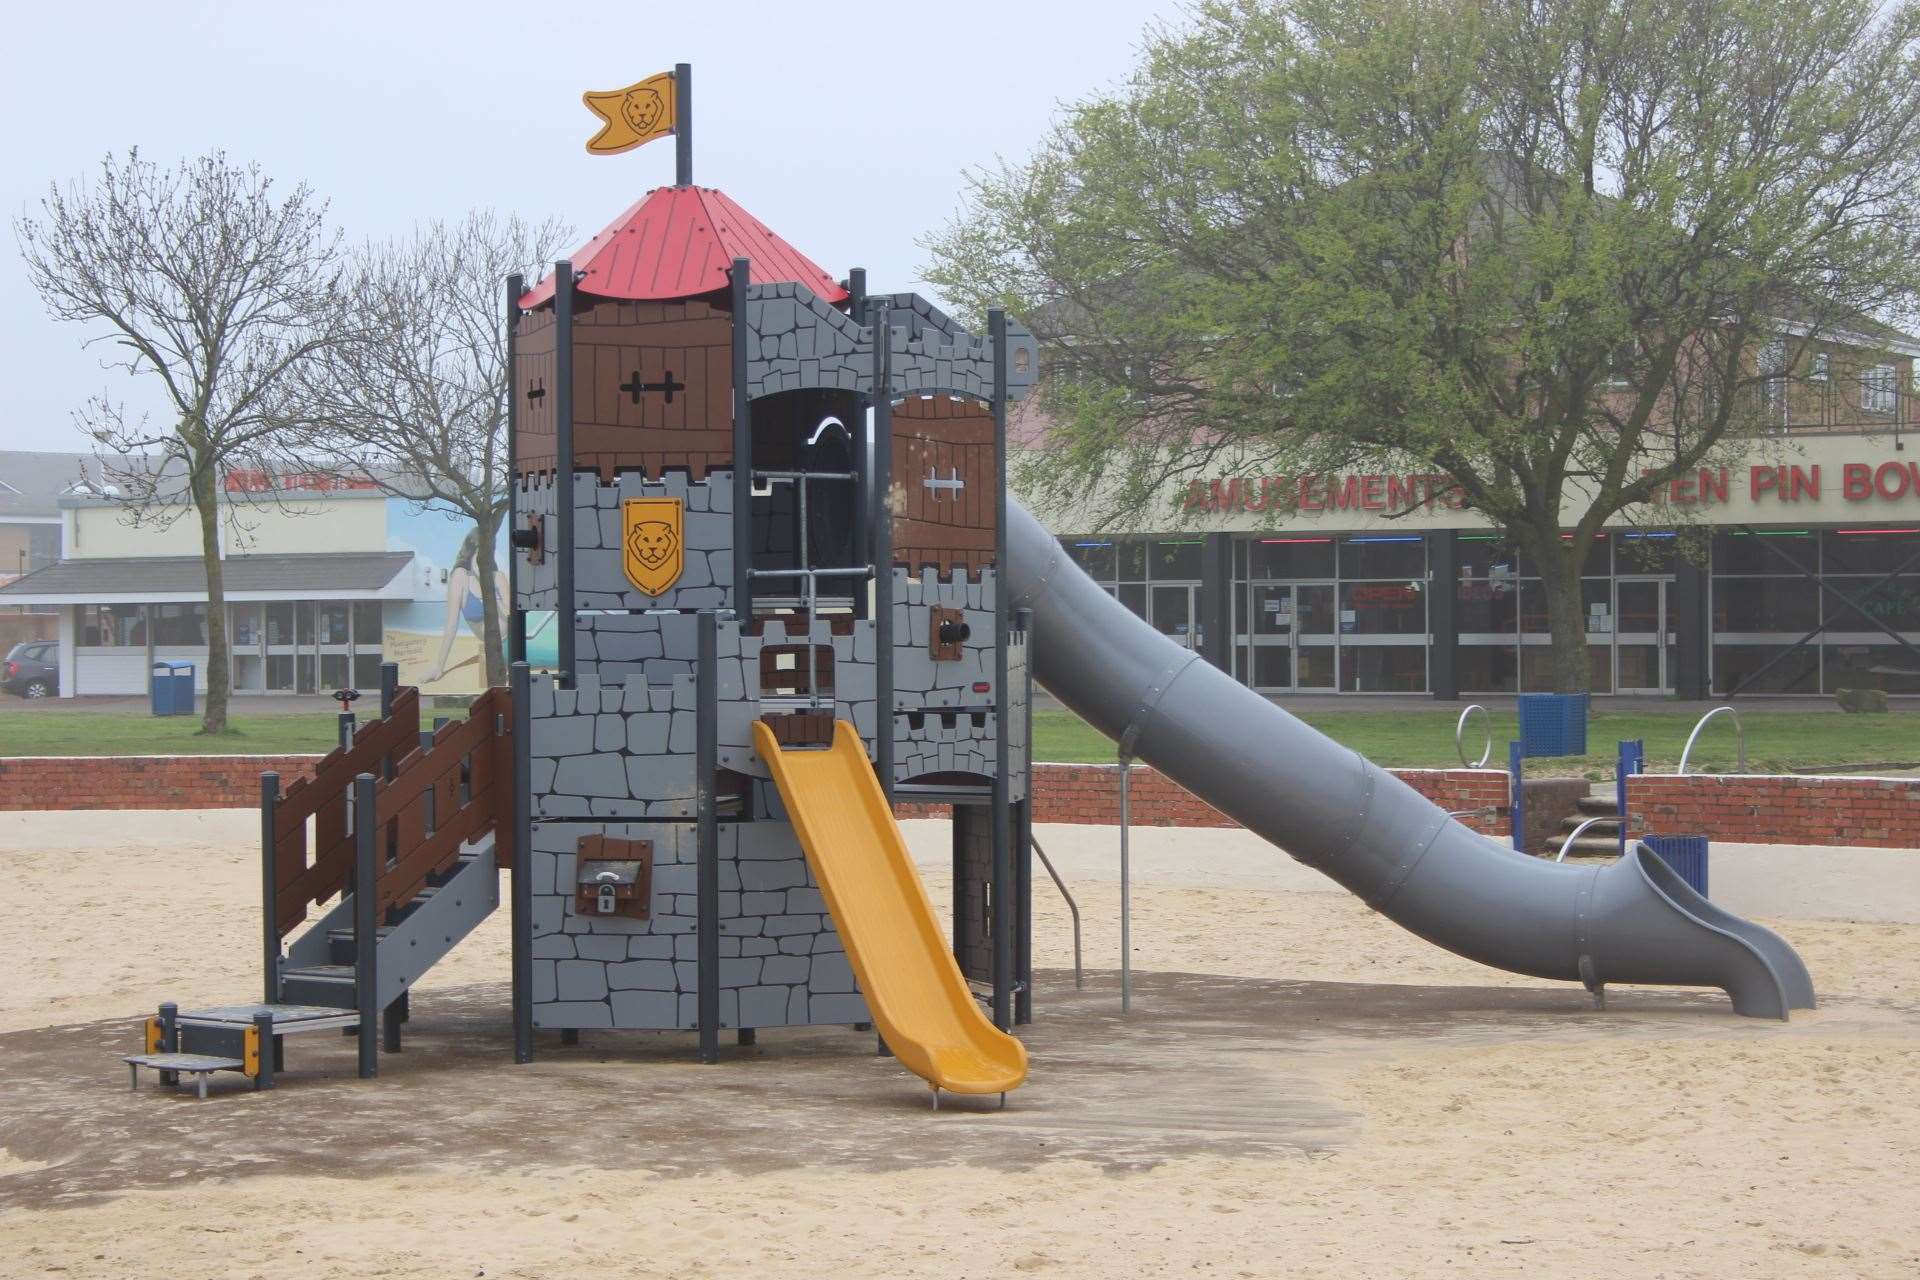 Castle slide at the sandpit children's play area at Beachfields on the seafront in Sheerness